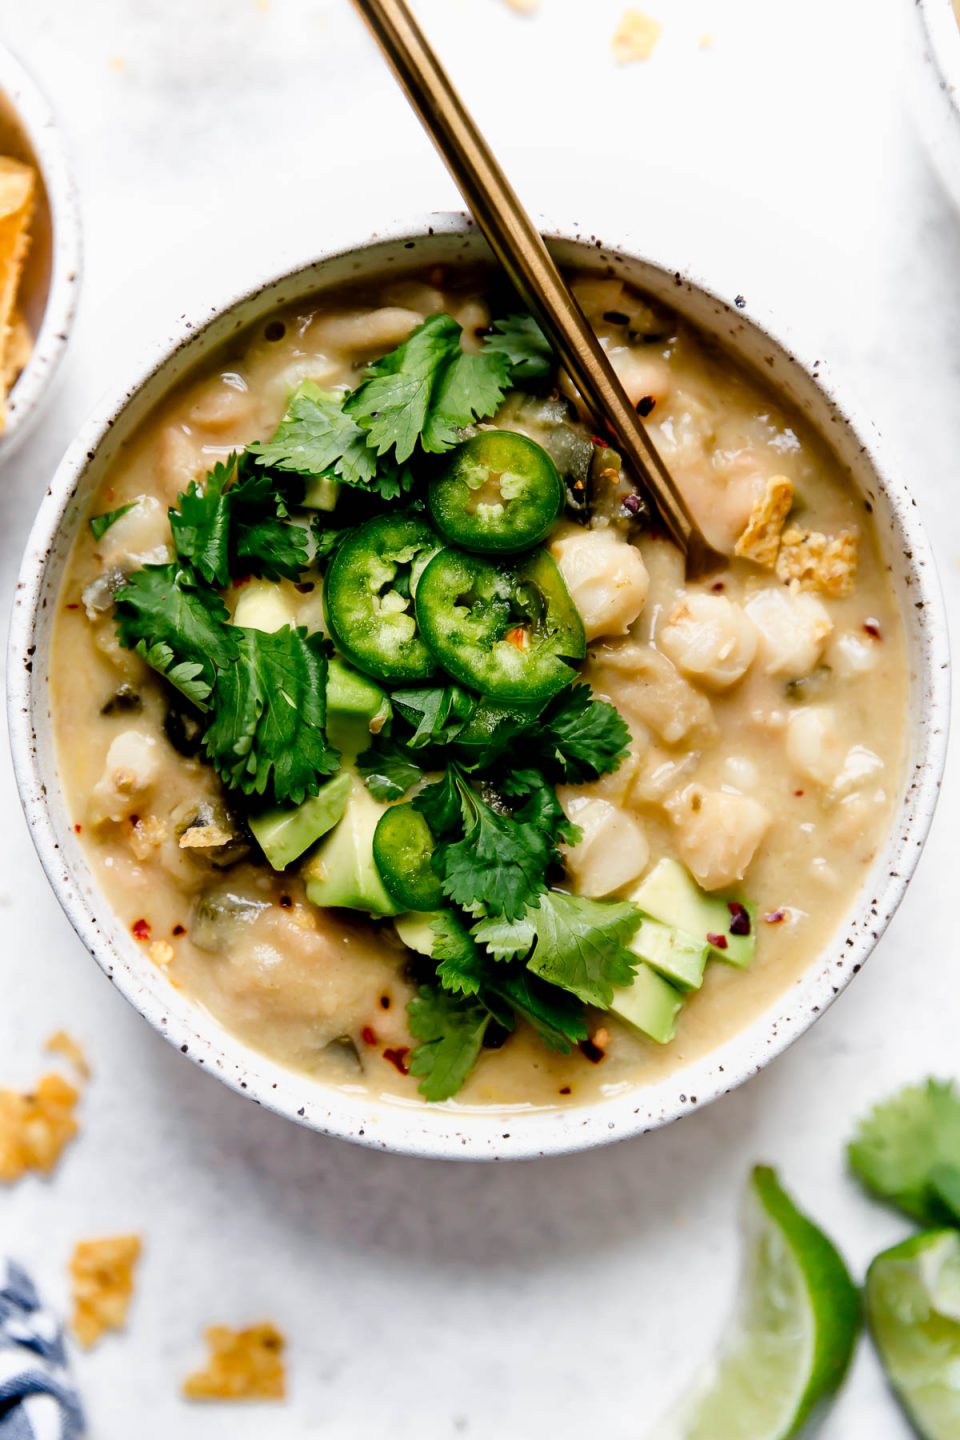 Vegan White Chili With White Beans Hominy Plays Well With Butter